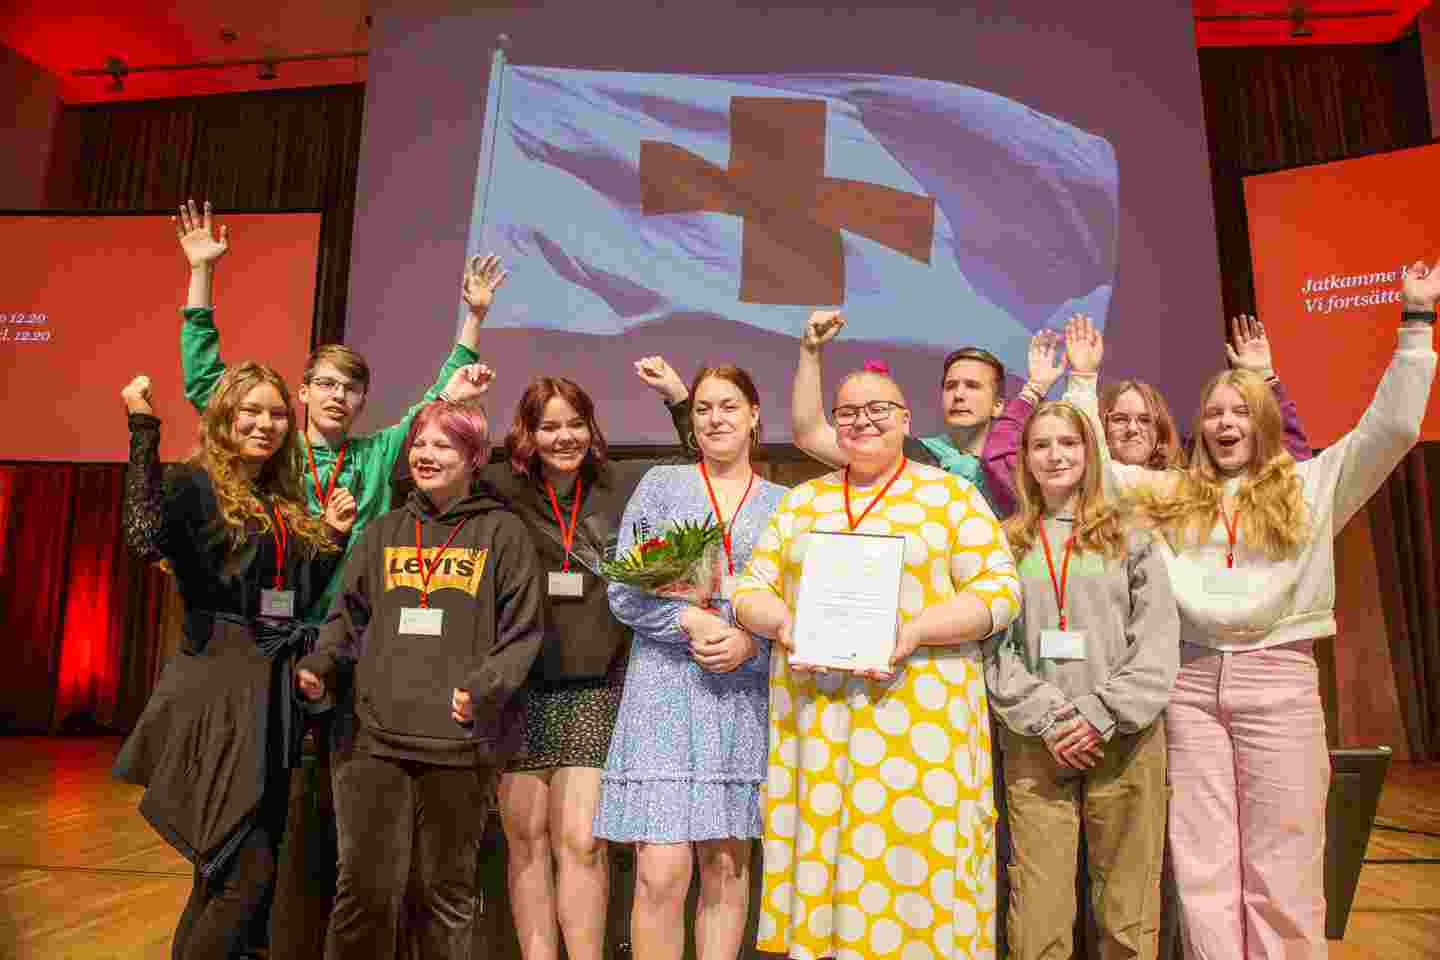 Young, smiling Red Cross volunteers accepting an award on a stage.